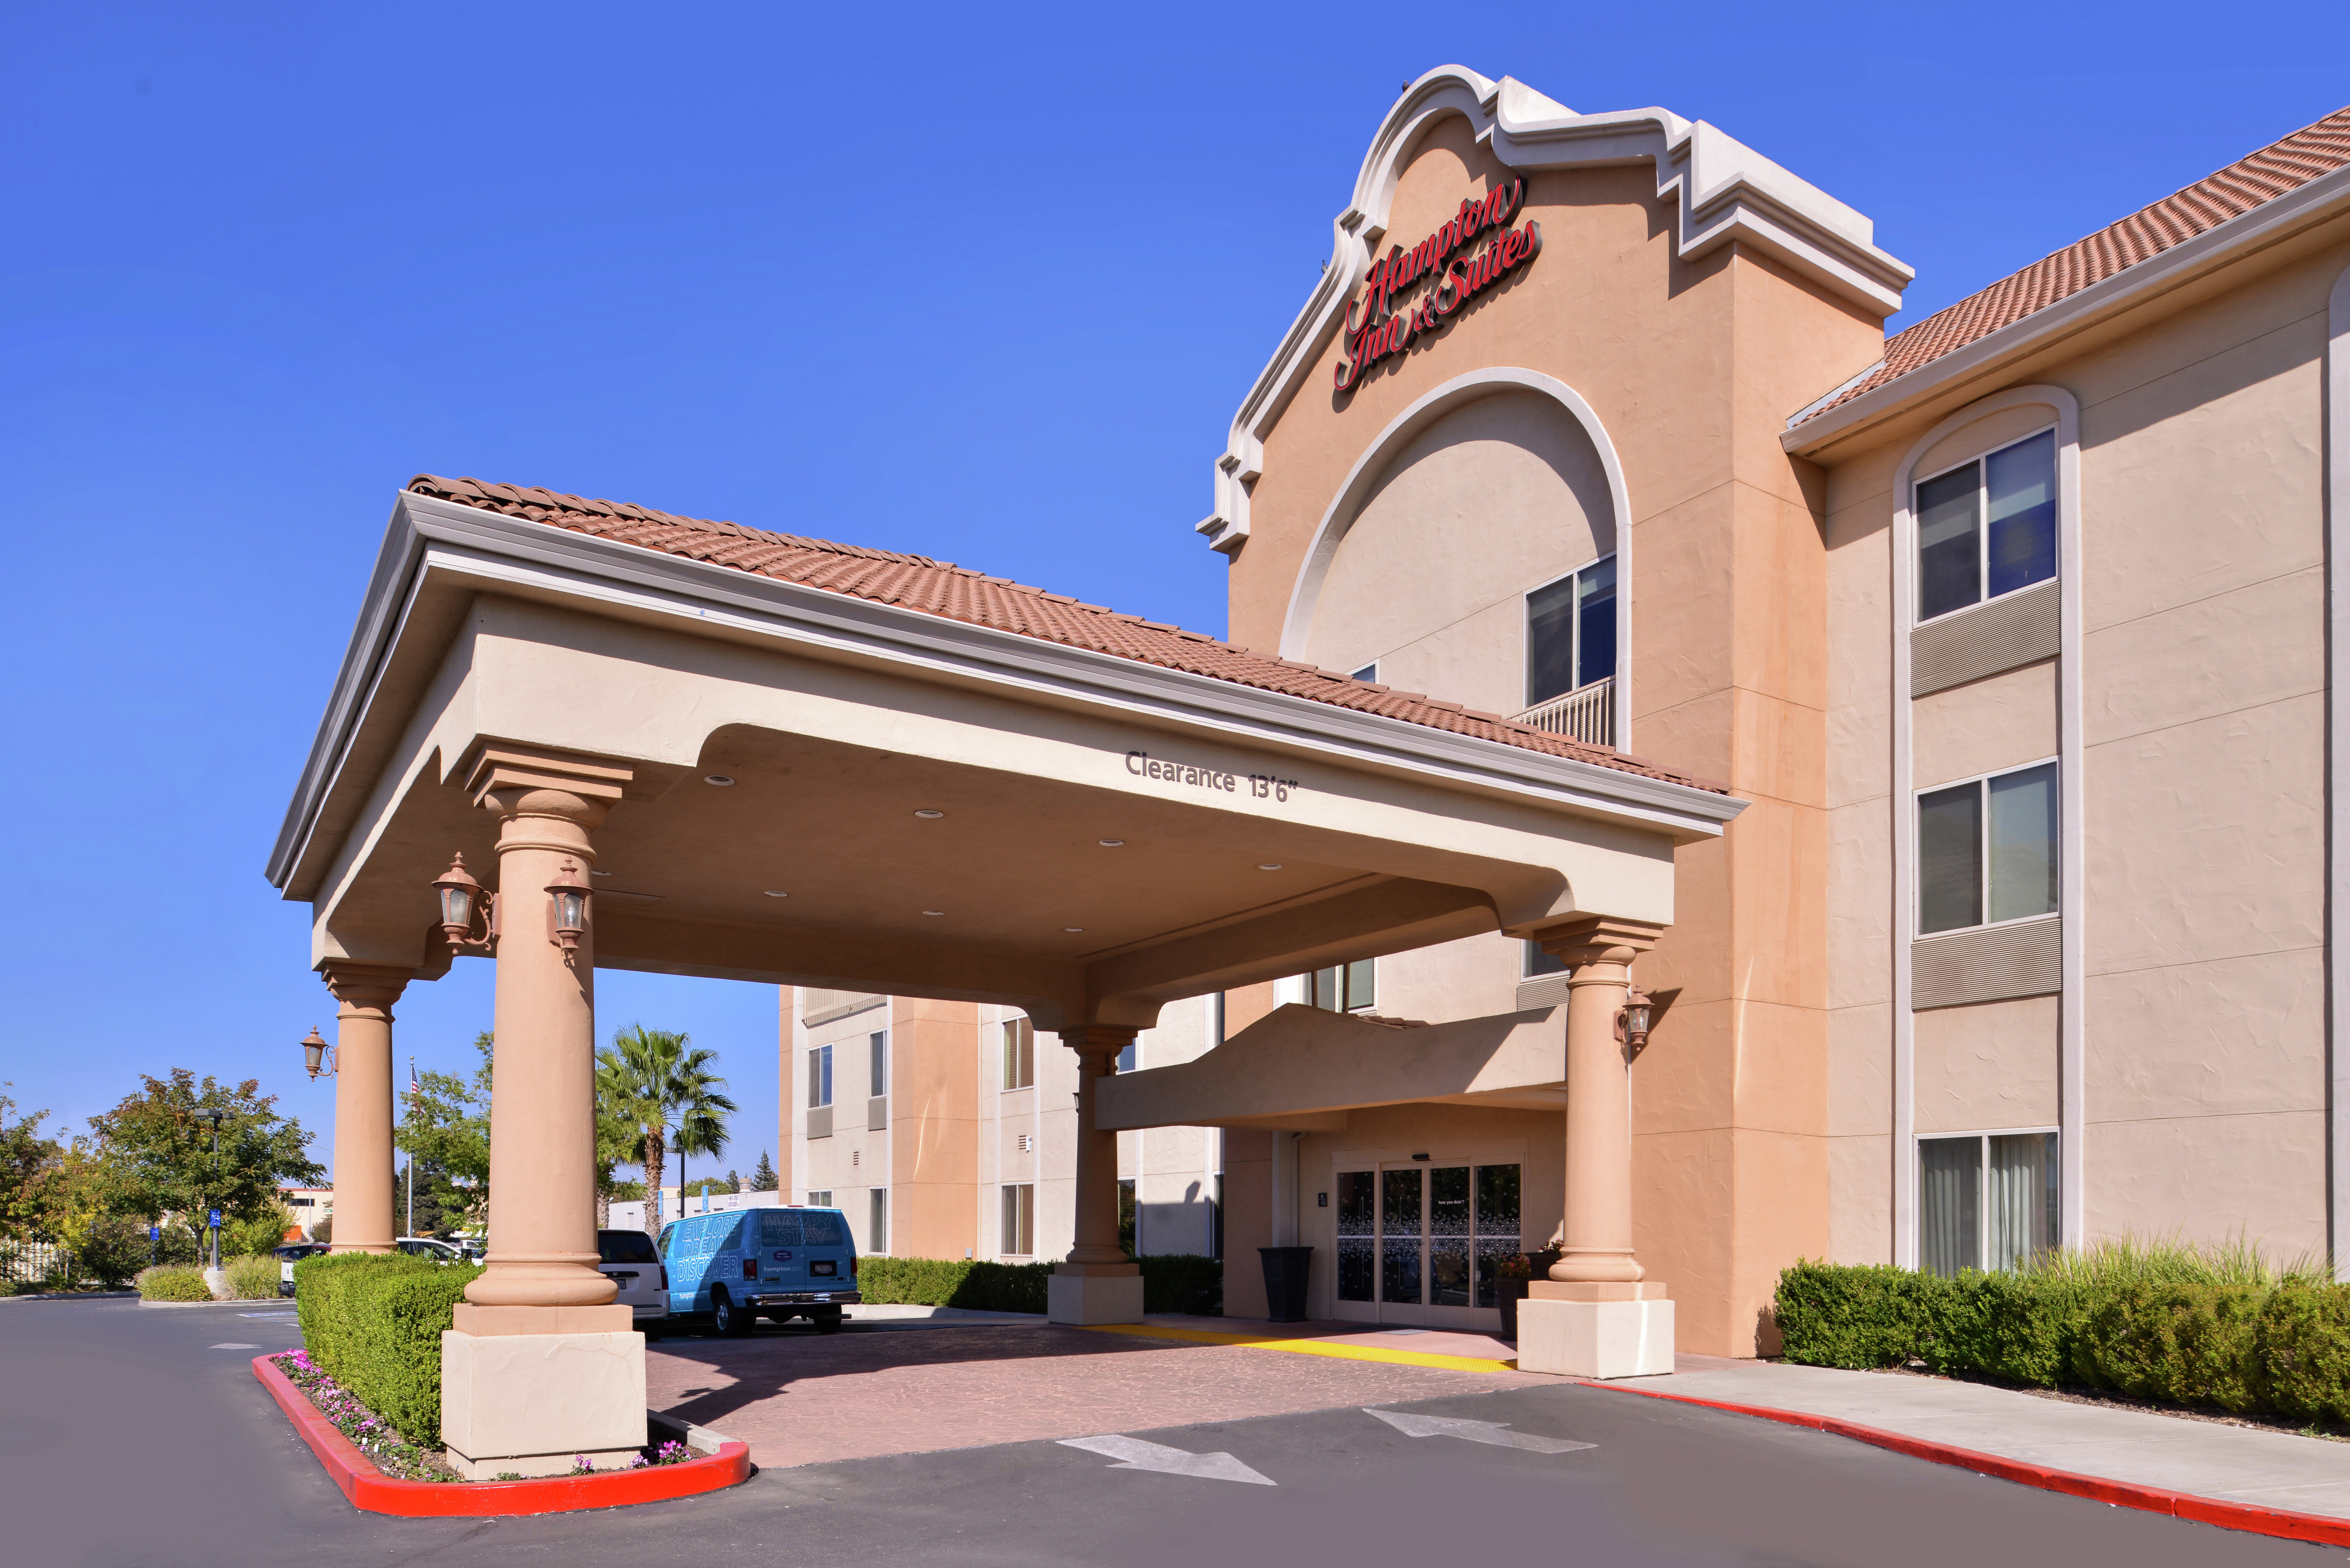 Daytime View of Hotel Exterior Entrance